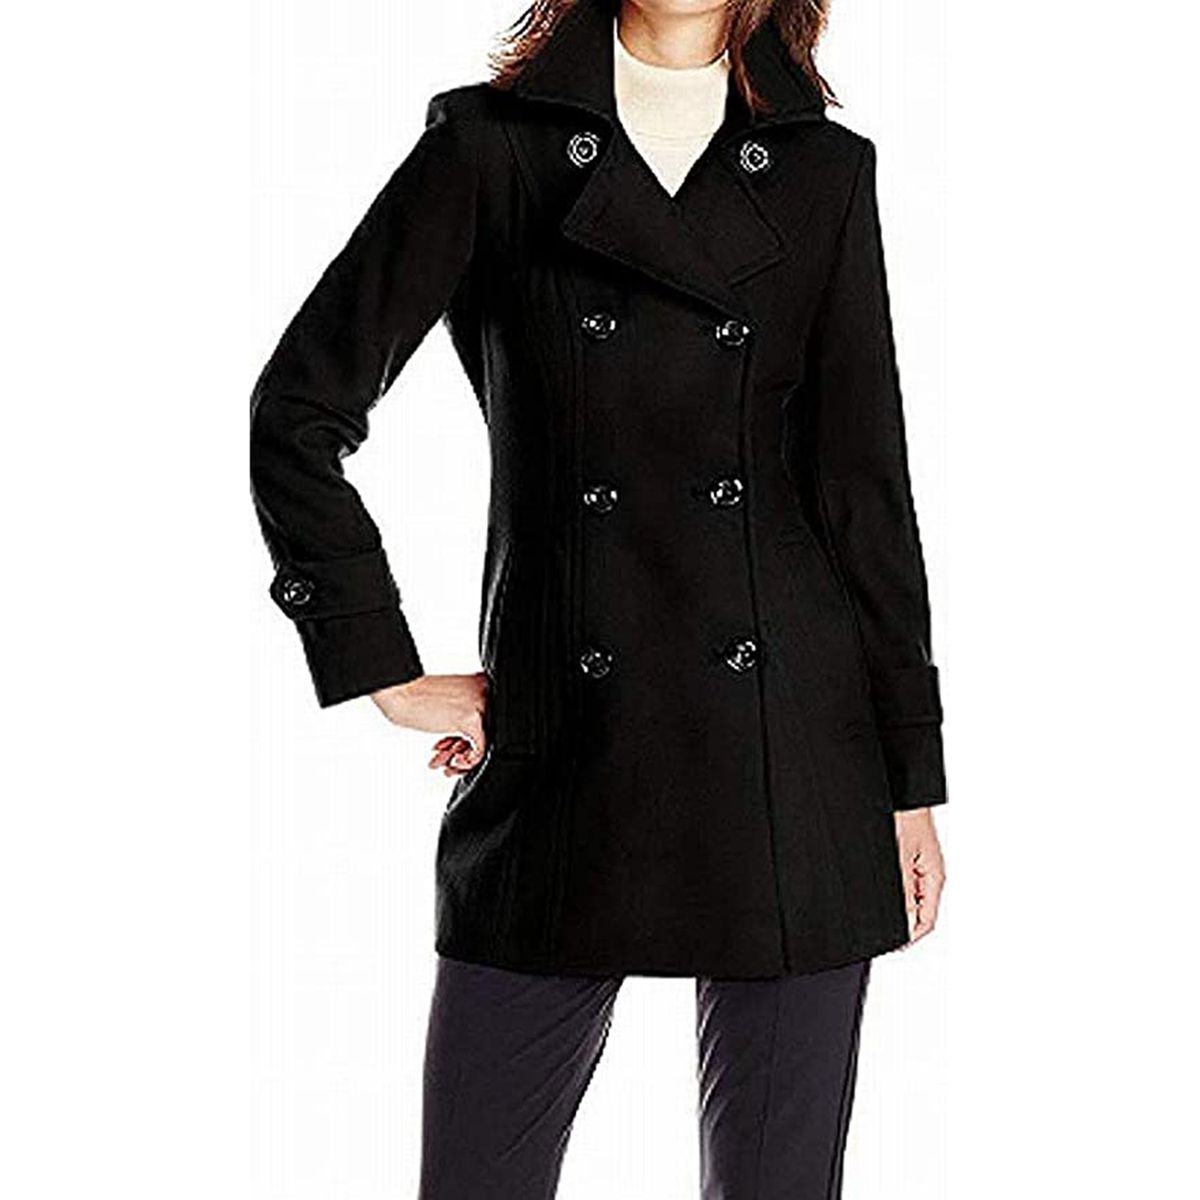 12 Best Peacoats for Women, According to Real Reviews | Travel + Leisure